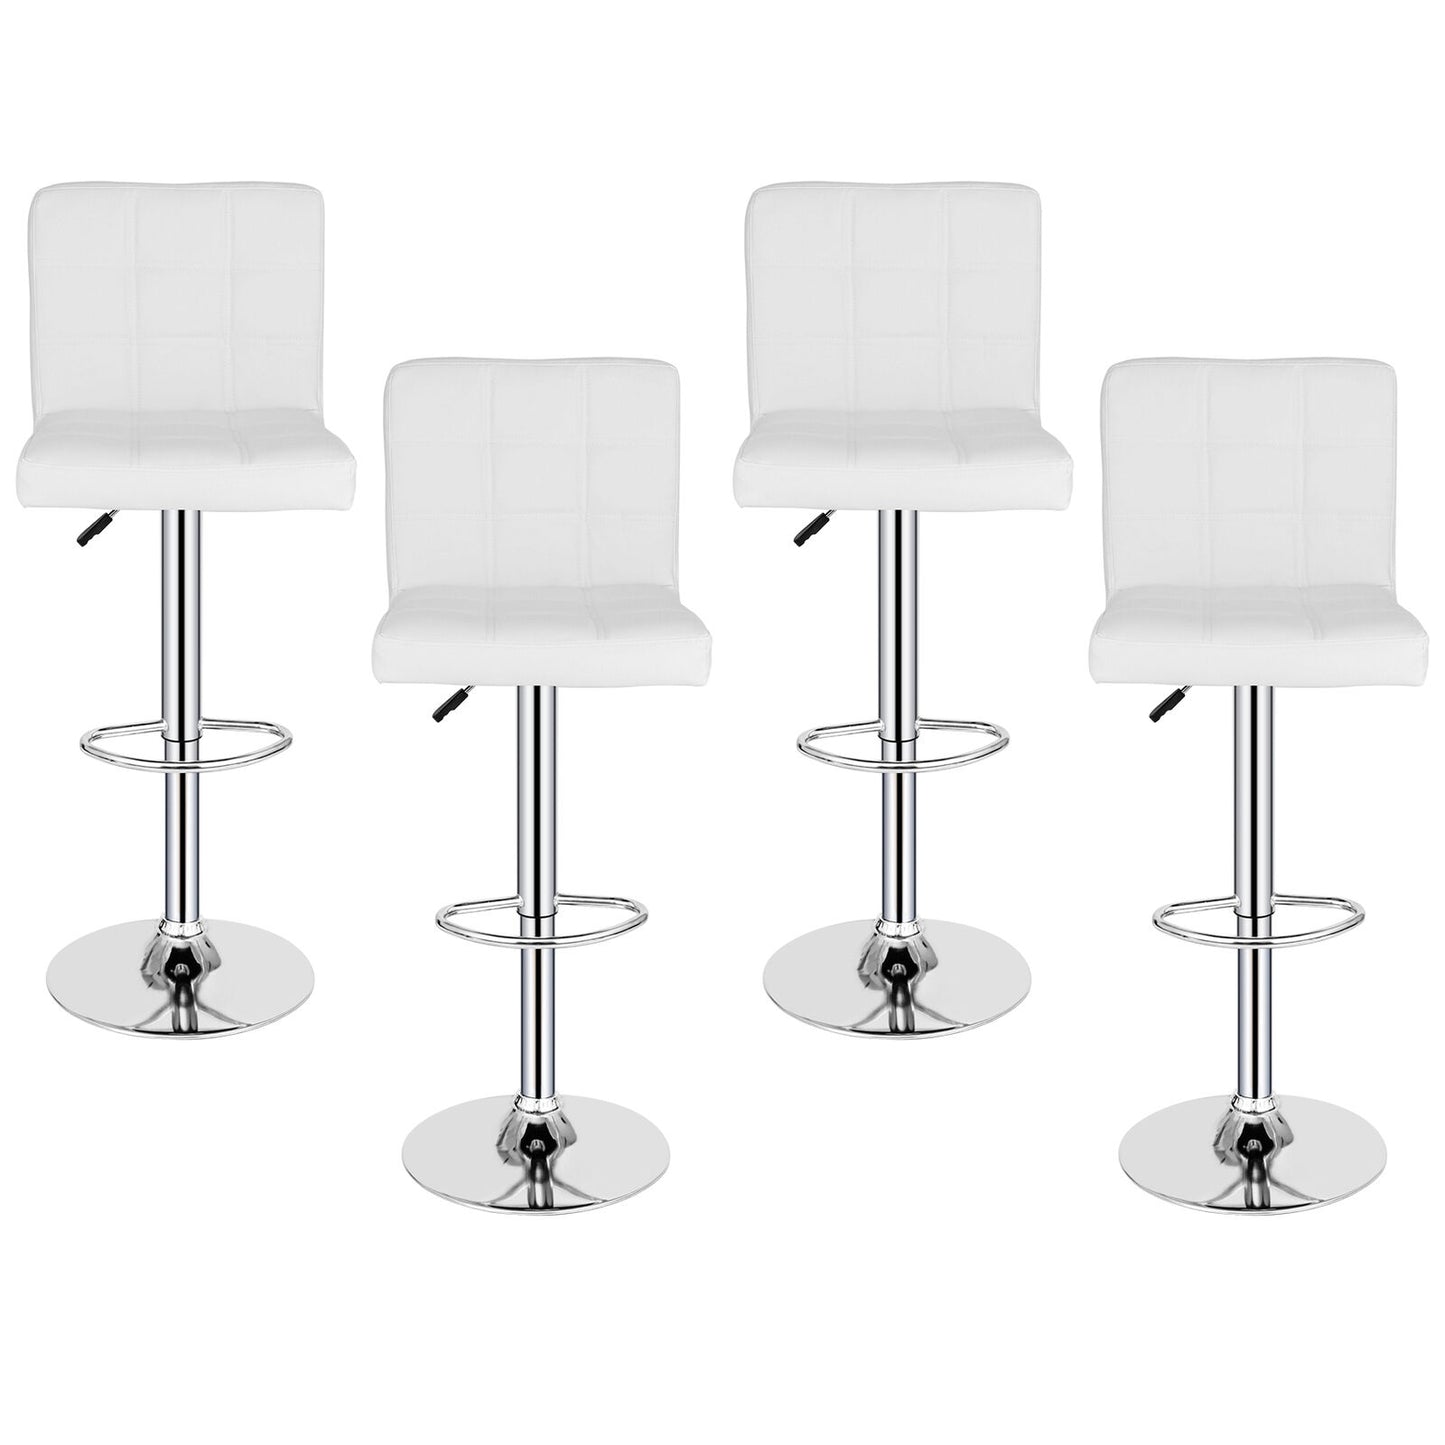 Set of 4 Adjustable Height Bar Stools PU Leather Swivel Pub Dining Chairs White